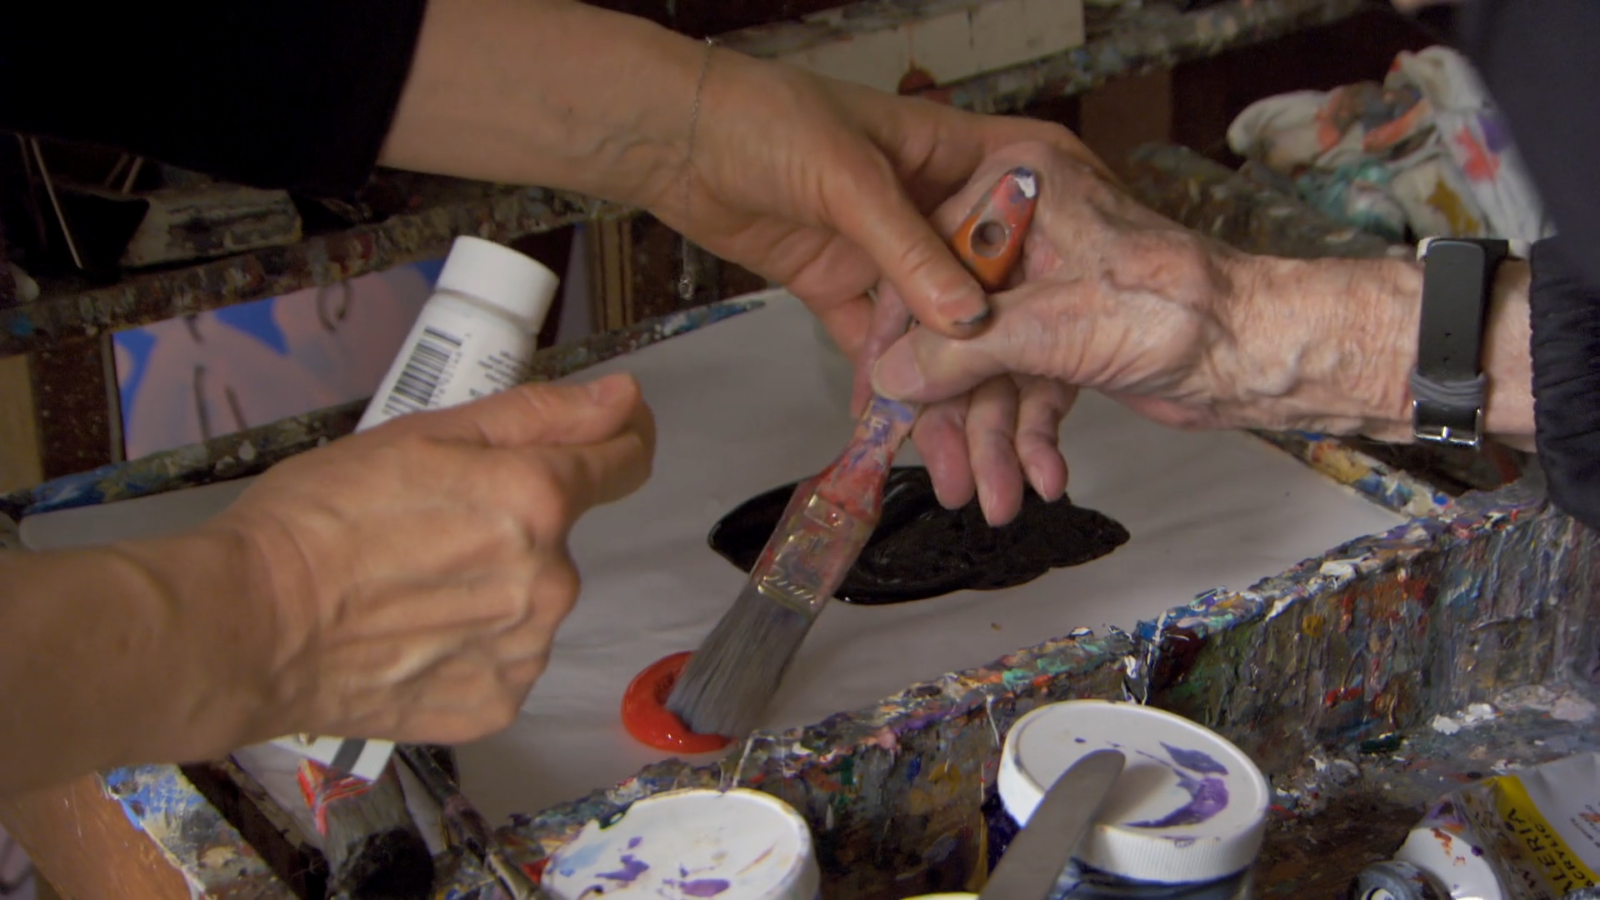 In a still shot from "Serge Hollerbach: A Russian Painter in New York," Olga Nenazhivina's hand guides Serge Hollerbach's hand, in which he is holding a paintbrush, to the right pile of red paint on his palette.